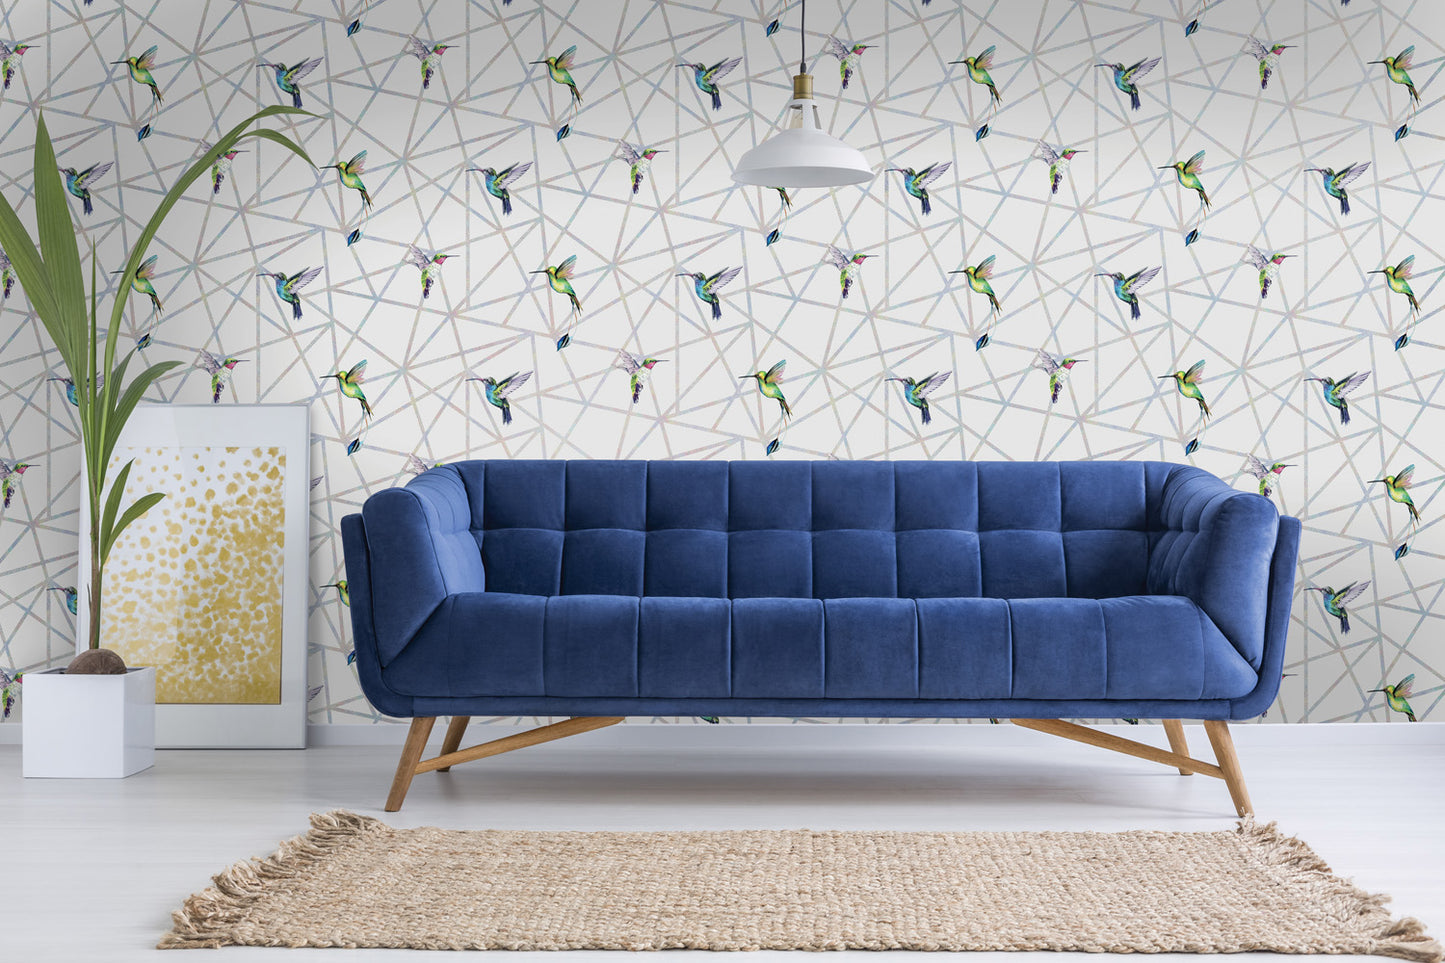 Geometric Wallpaper - silver with birds